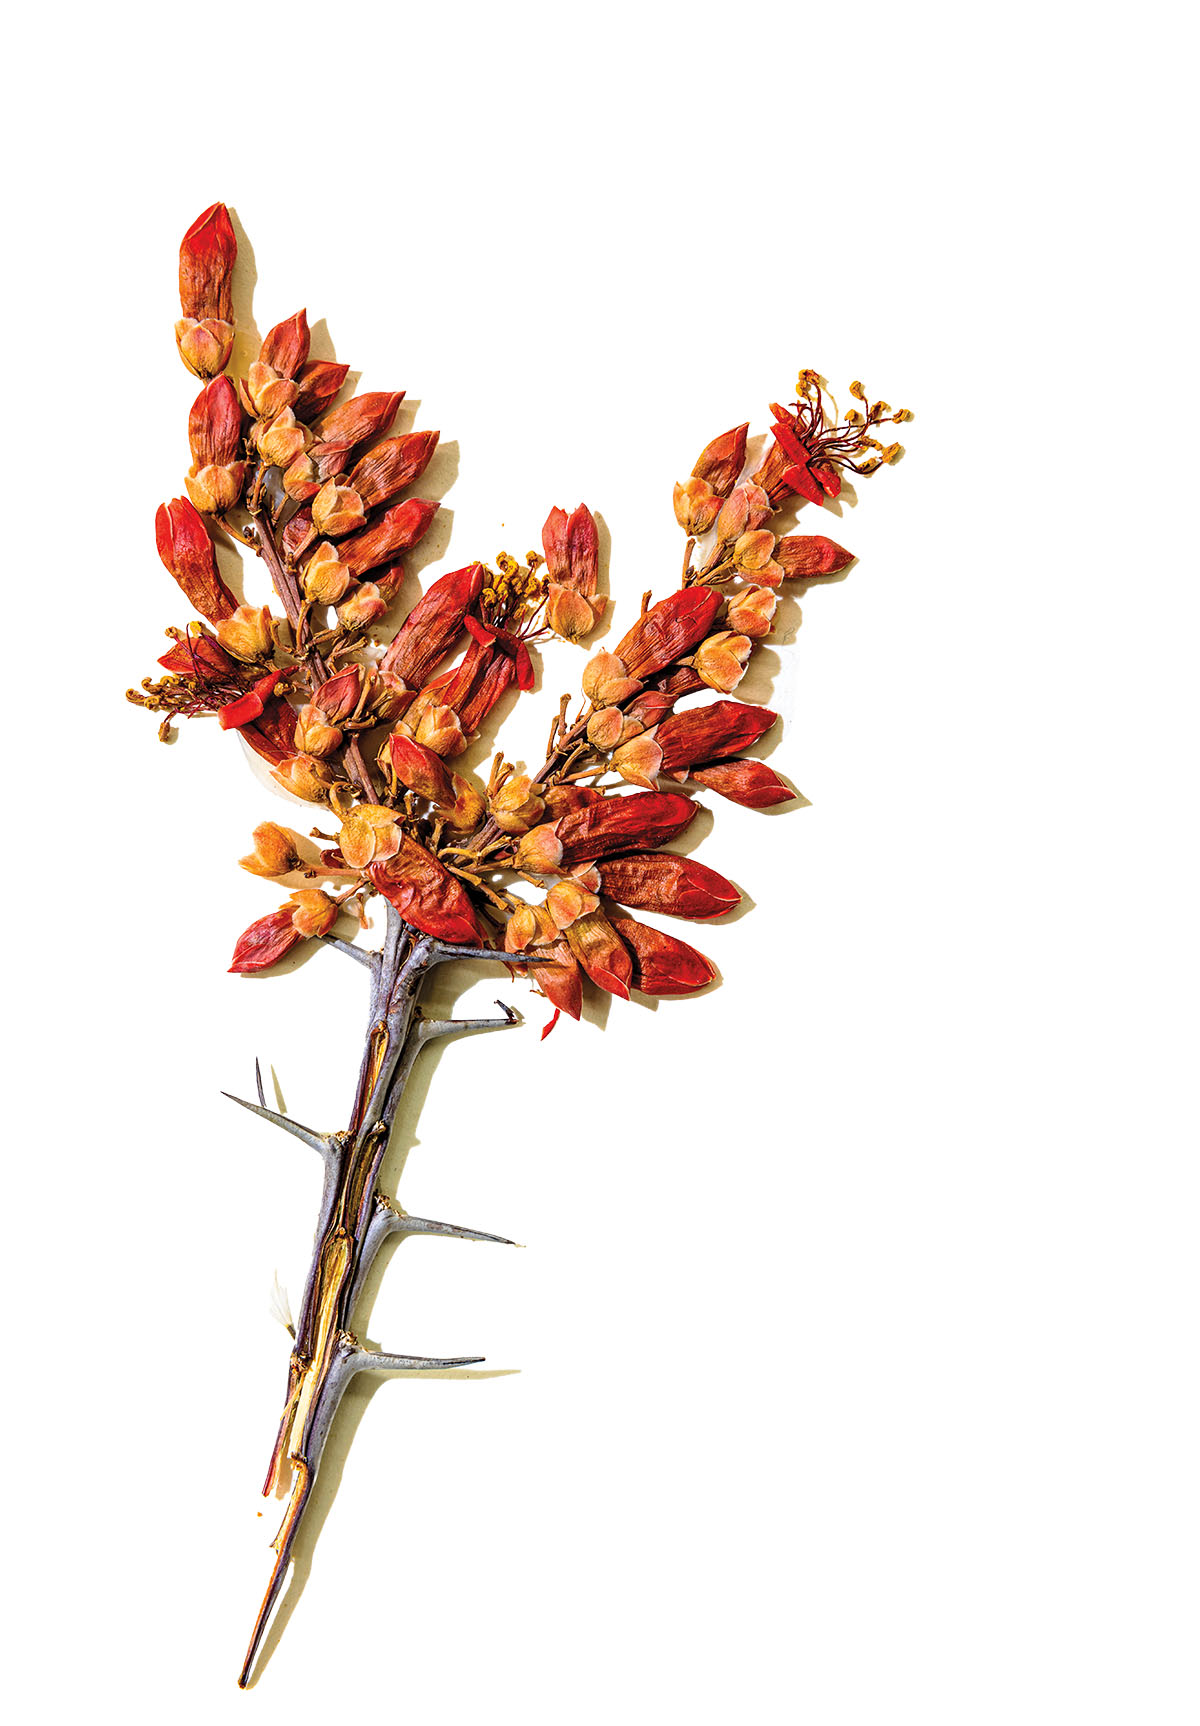 A bright red dried pressed flower on a white background